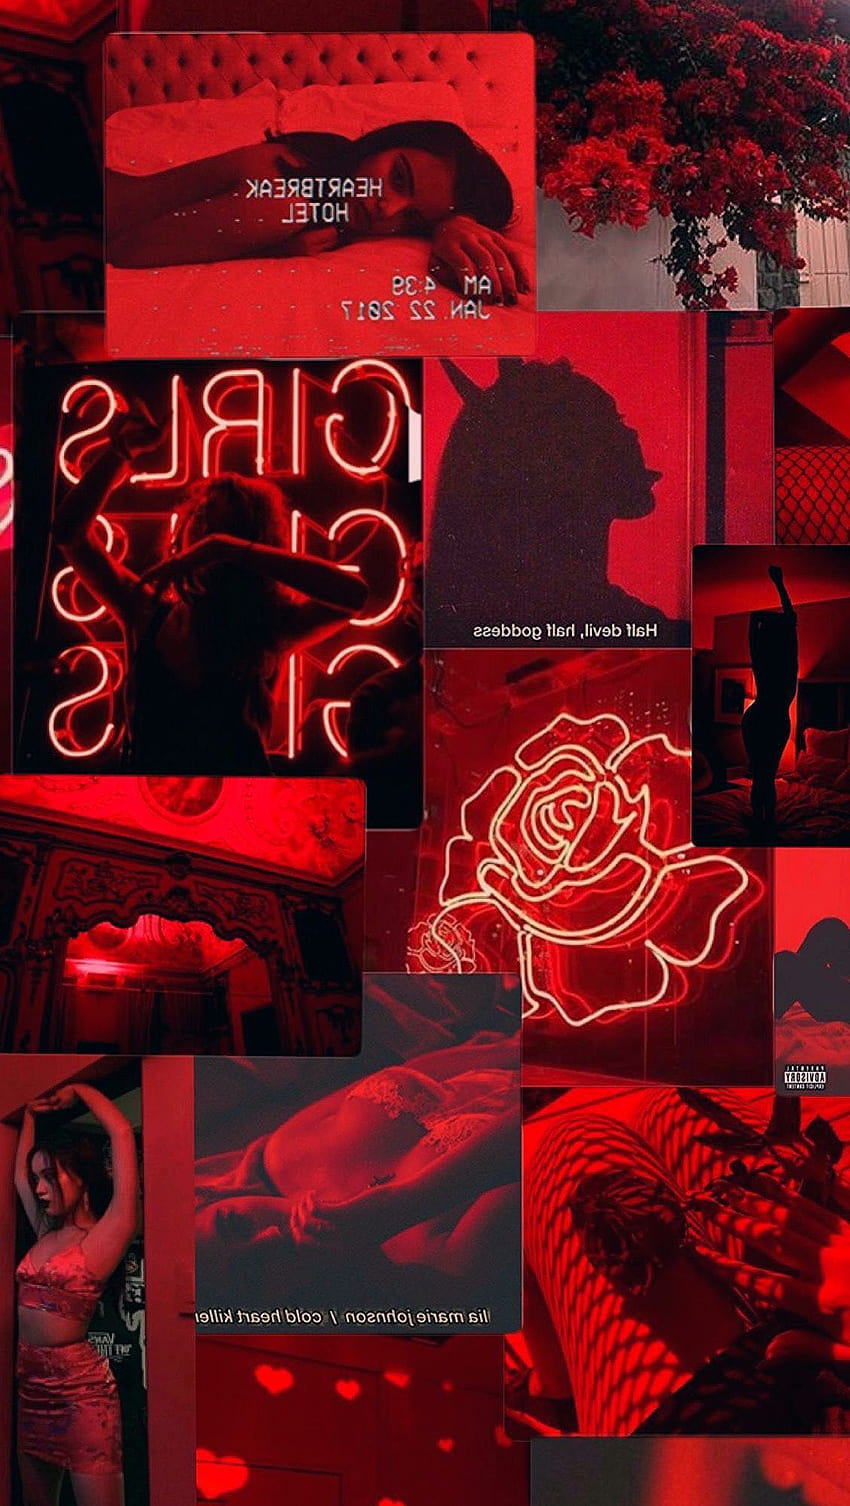 Red aesthetic wallpaper for phone with red neon lights - Baddie